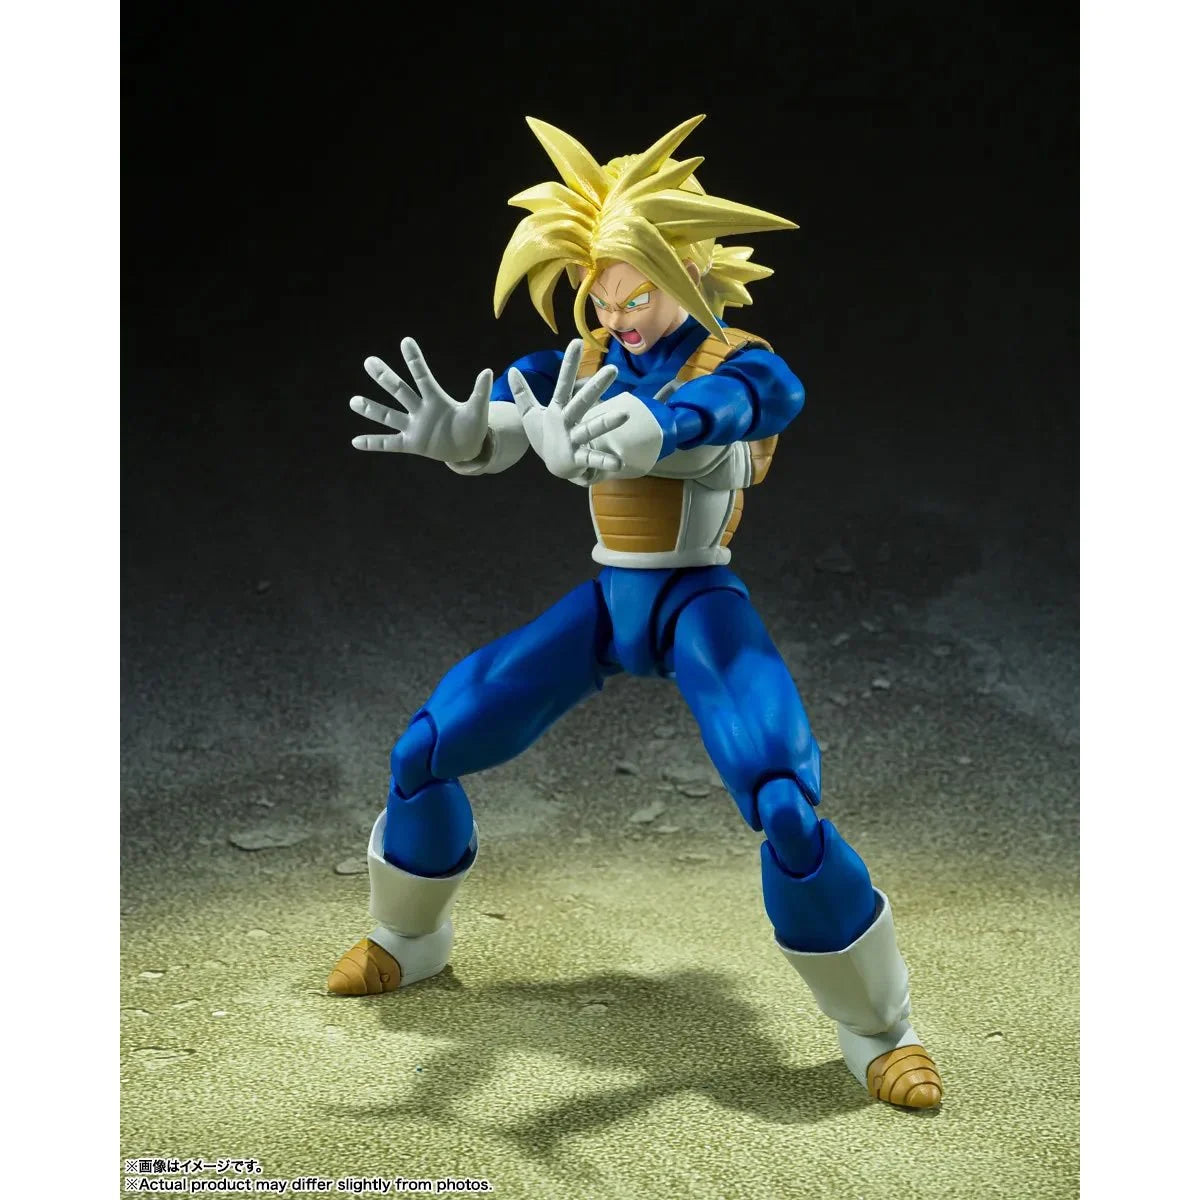 Dragon Ball SS Trunks Infinte Latent Super Power S.H. Figuarts Figure by Bandai -Tamashii Nations - India - www.superherotoystore.com